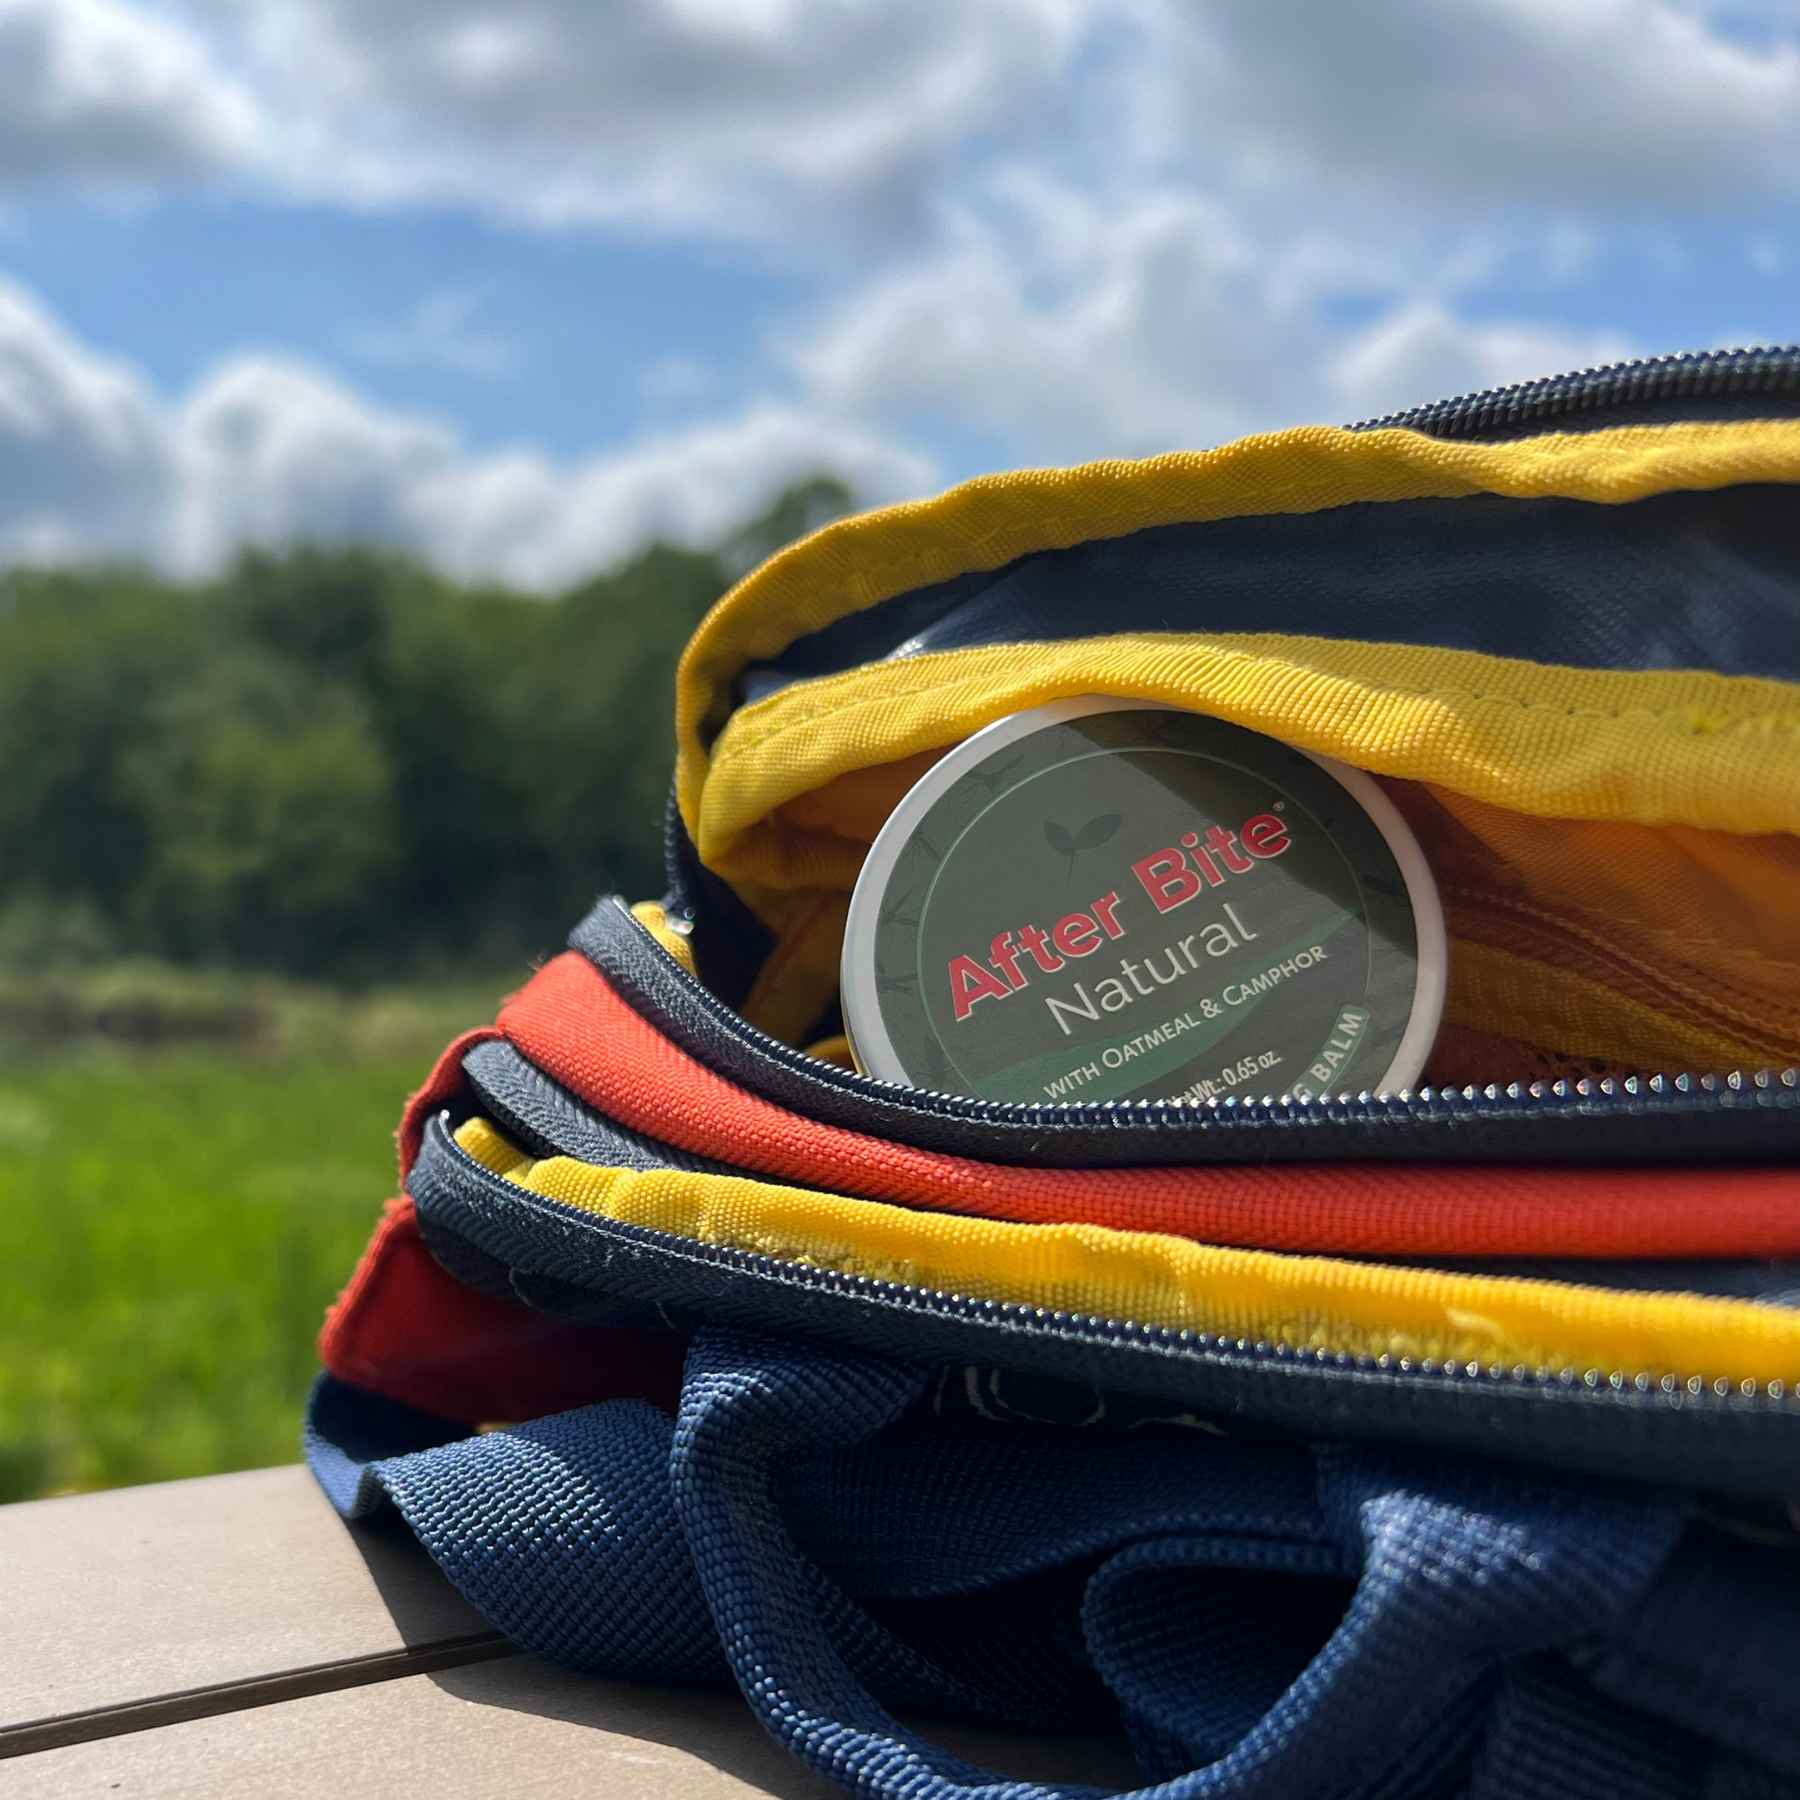 Tin of After Bite Natural peeking out of blue, red, and yellow backpack on a picnic table in summer